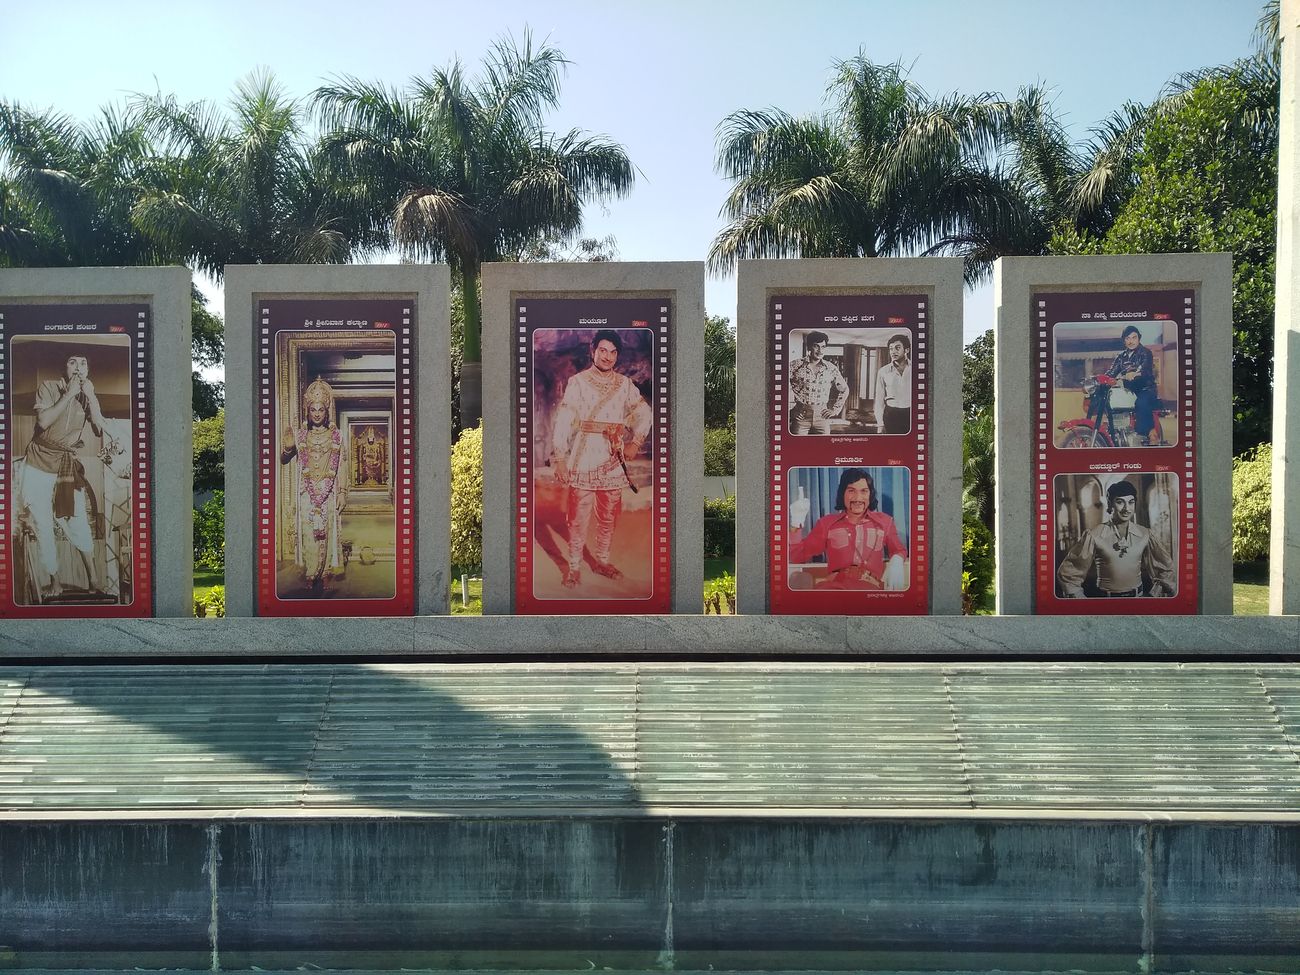 Superhit veteran actor Dr. Raj Kumar’s movie posters in a frame put up at his burial land for a memory 